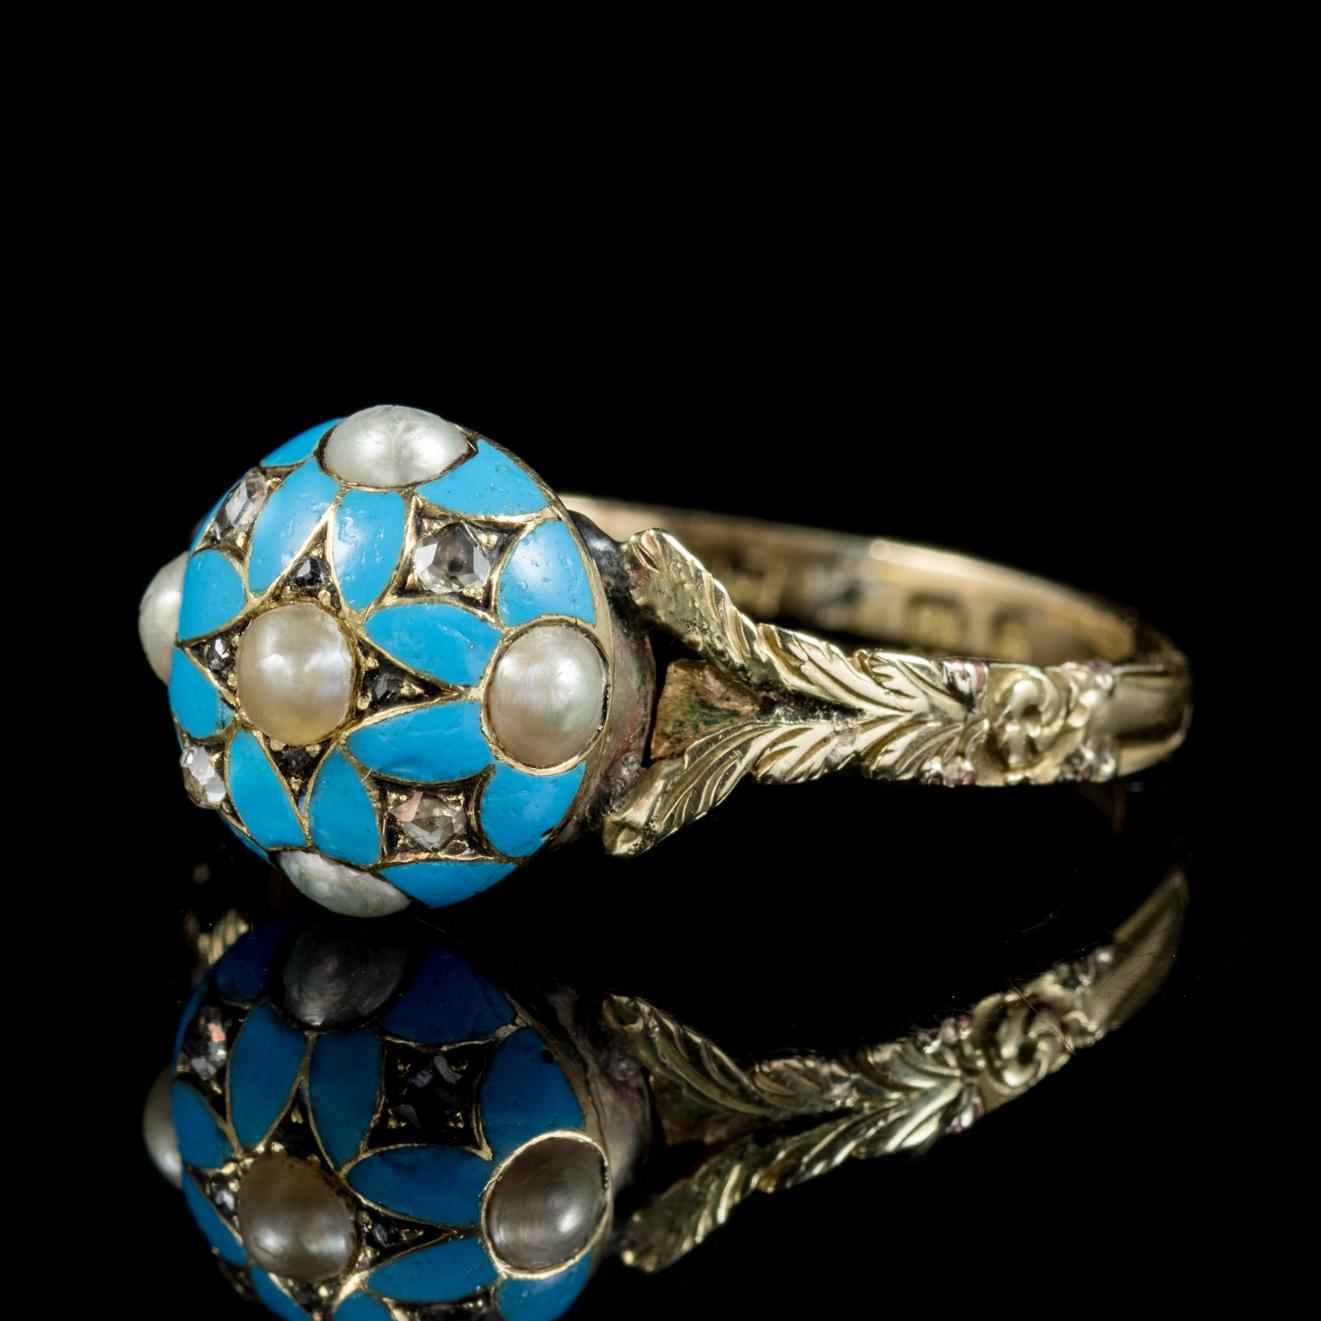 This fabulous antique Georgian Blue Enamel forget me not ring is fully hallmarked and dated London, 1801.

The pretty face displays four gorgeous duck egg blue Enamel forget me nots crowned with Pearls and twinkling Diamonds.

‘Forget-me-not, O